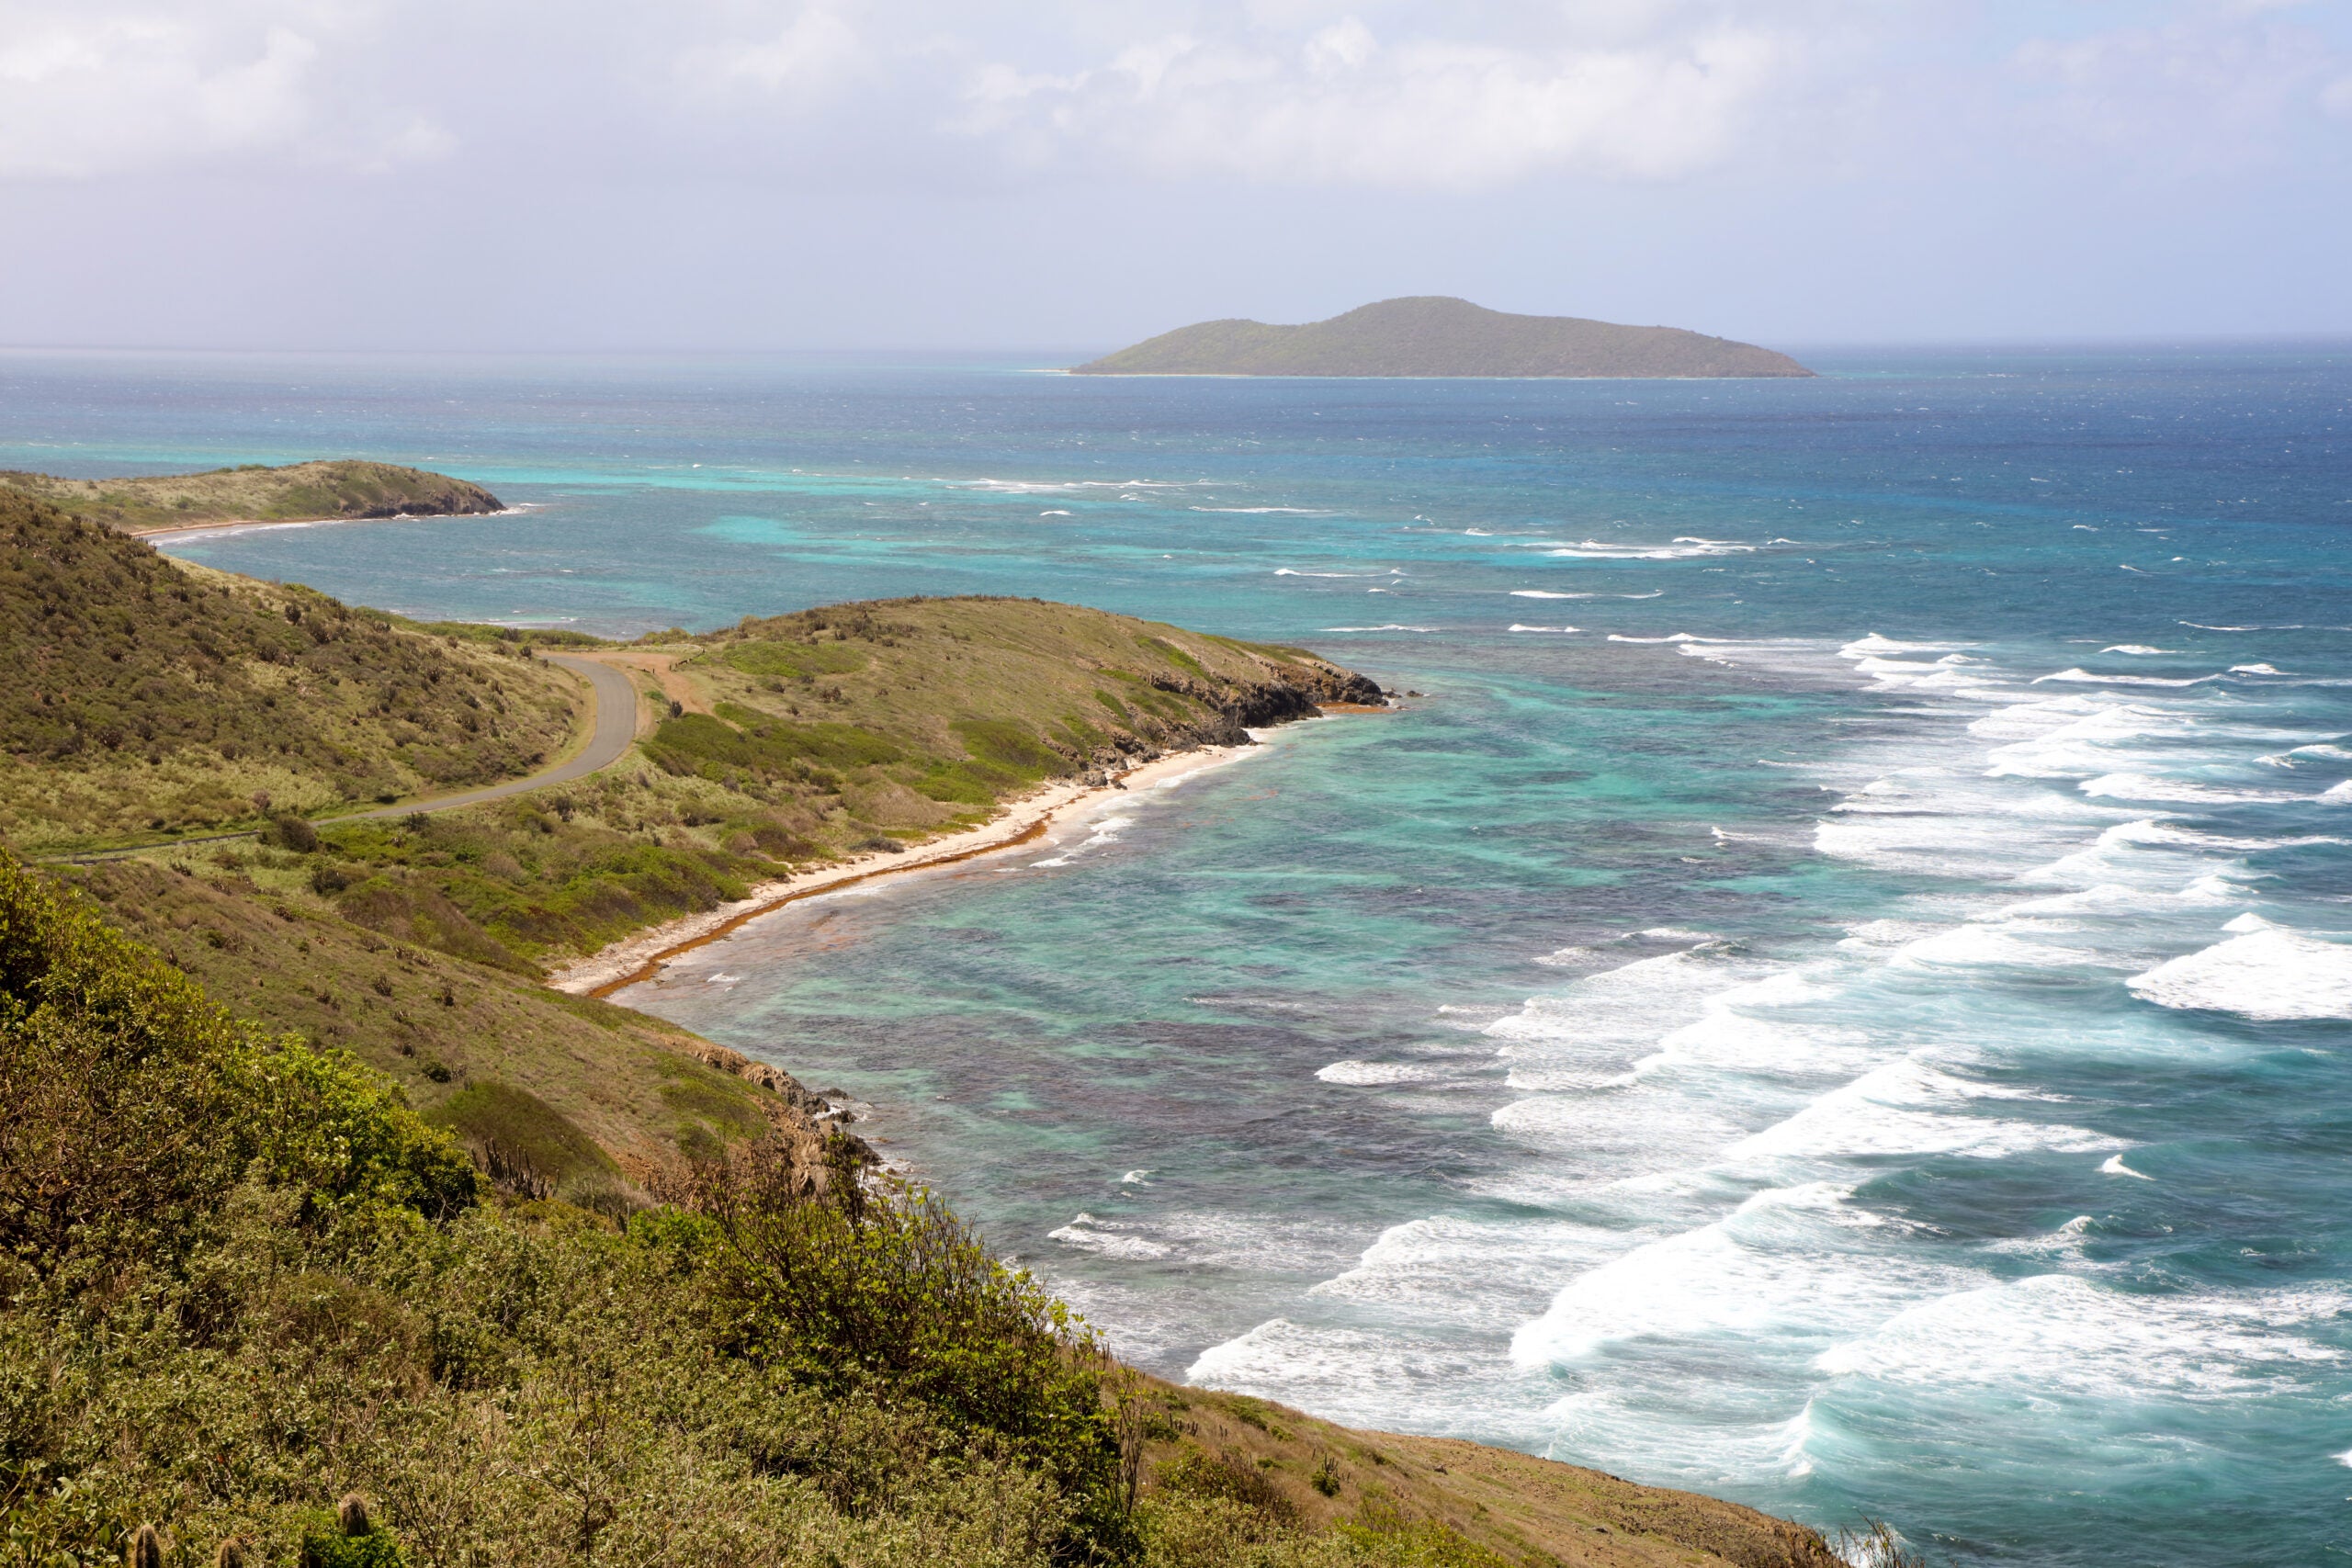 Fly to St. Croix in 2023 for as low as $275